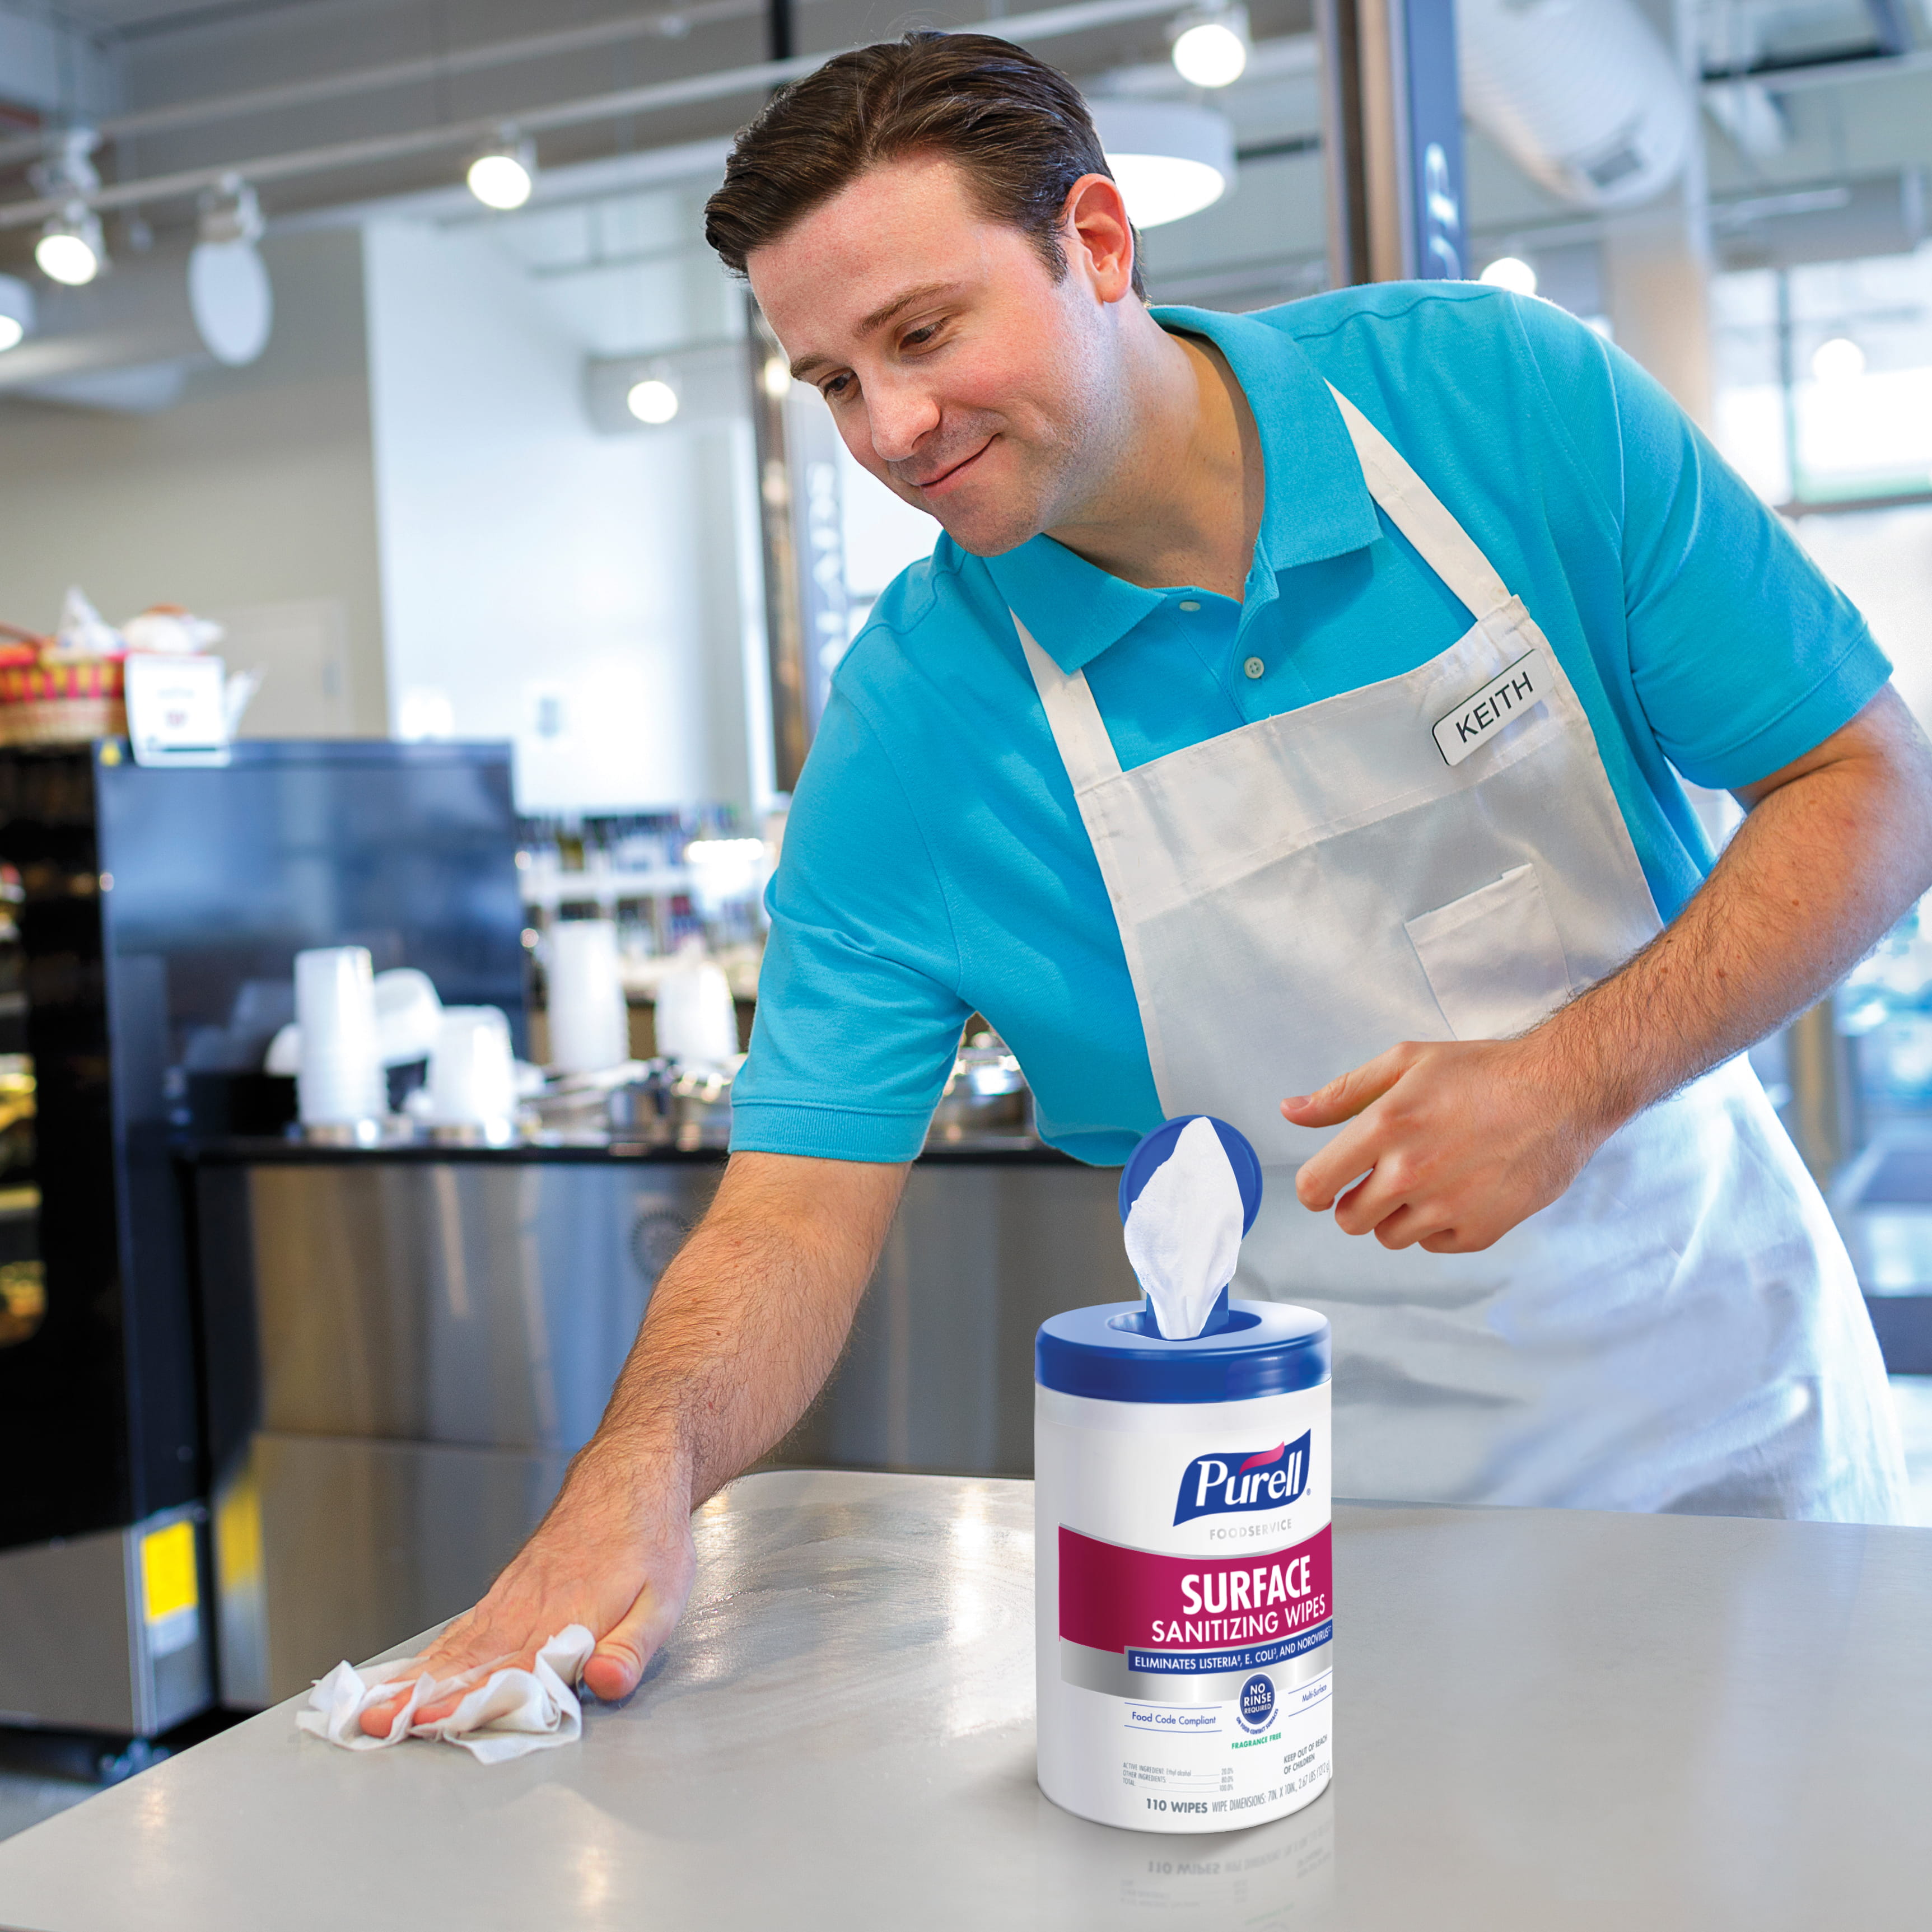 Convenience store employee cleans surface with PURELL disinfectant wipes